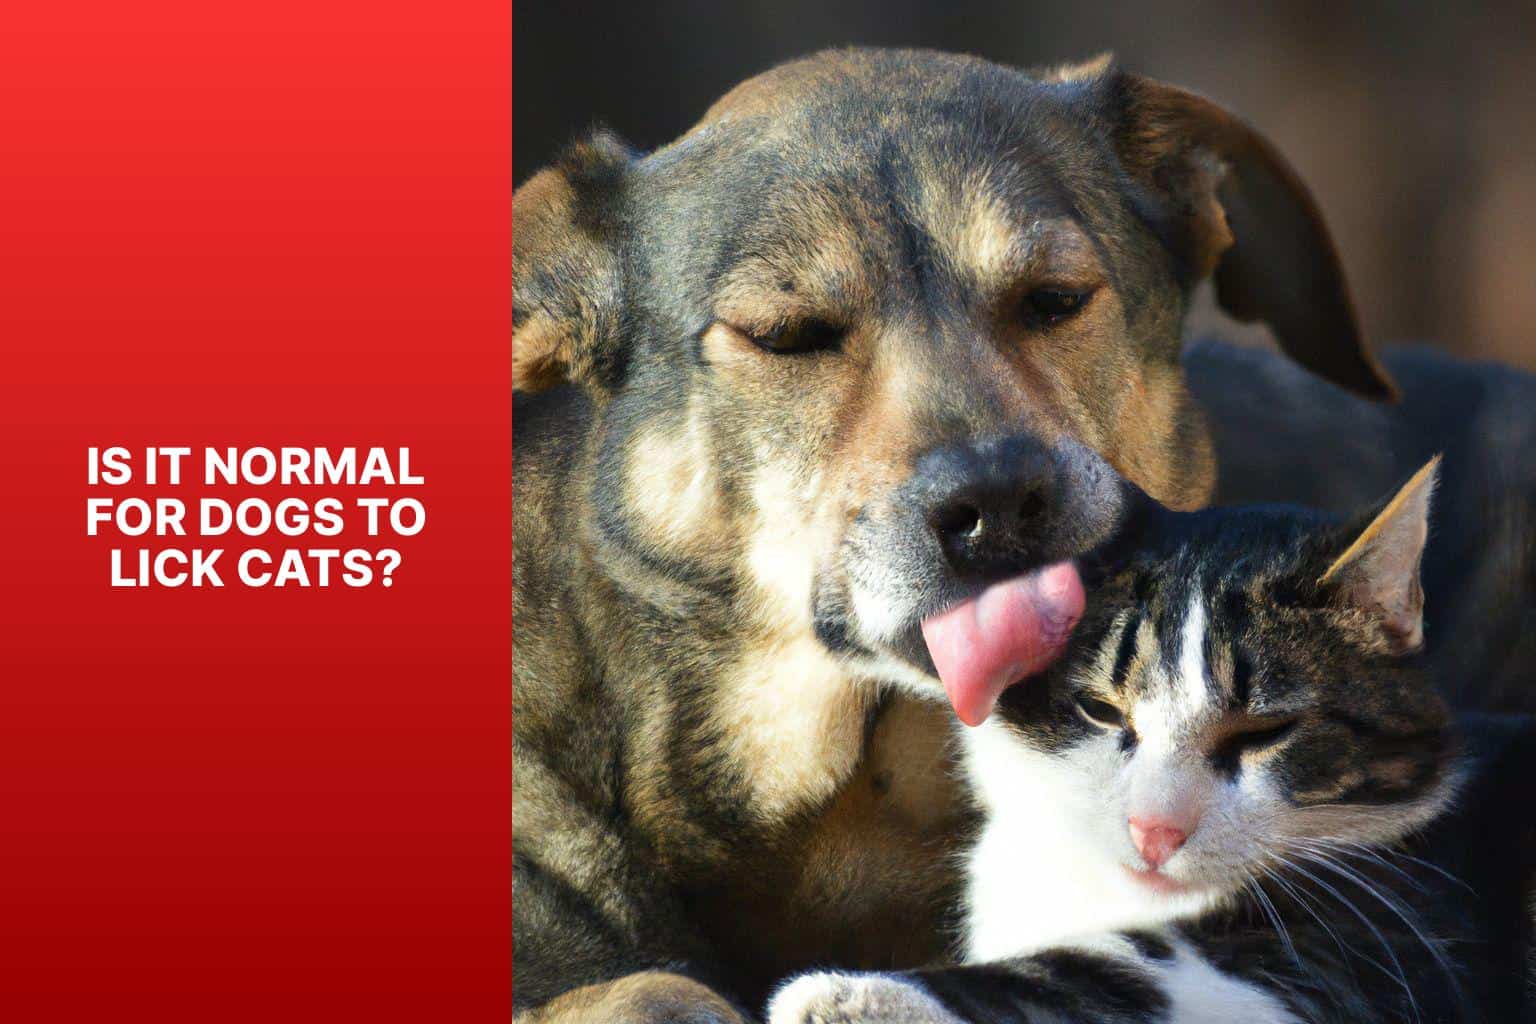 Is It Normal for Dogs to Lick Cats? - Why Does My Dog Lick My Cat? 